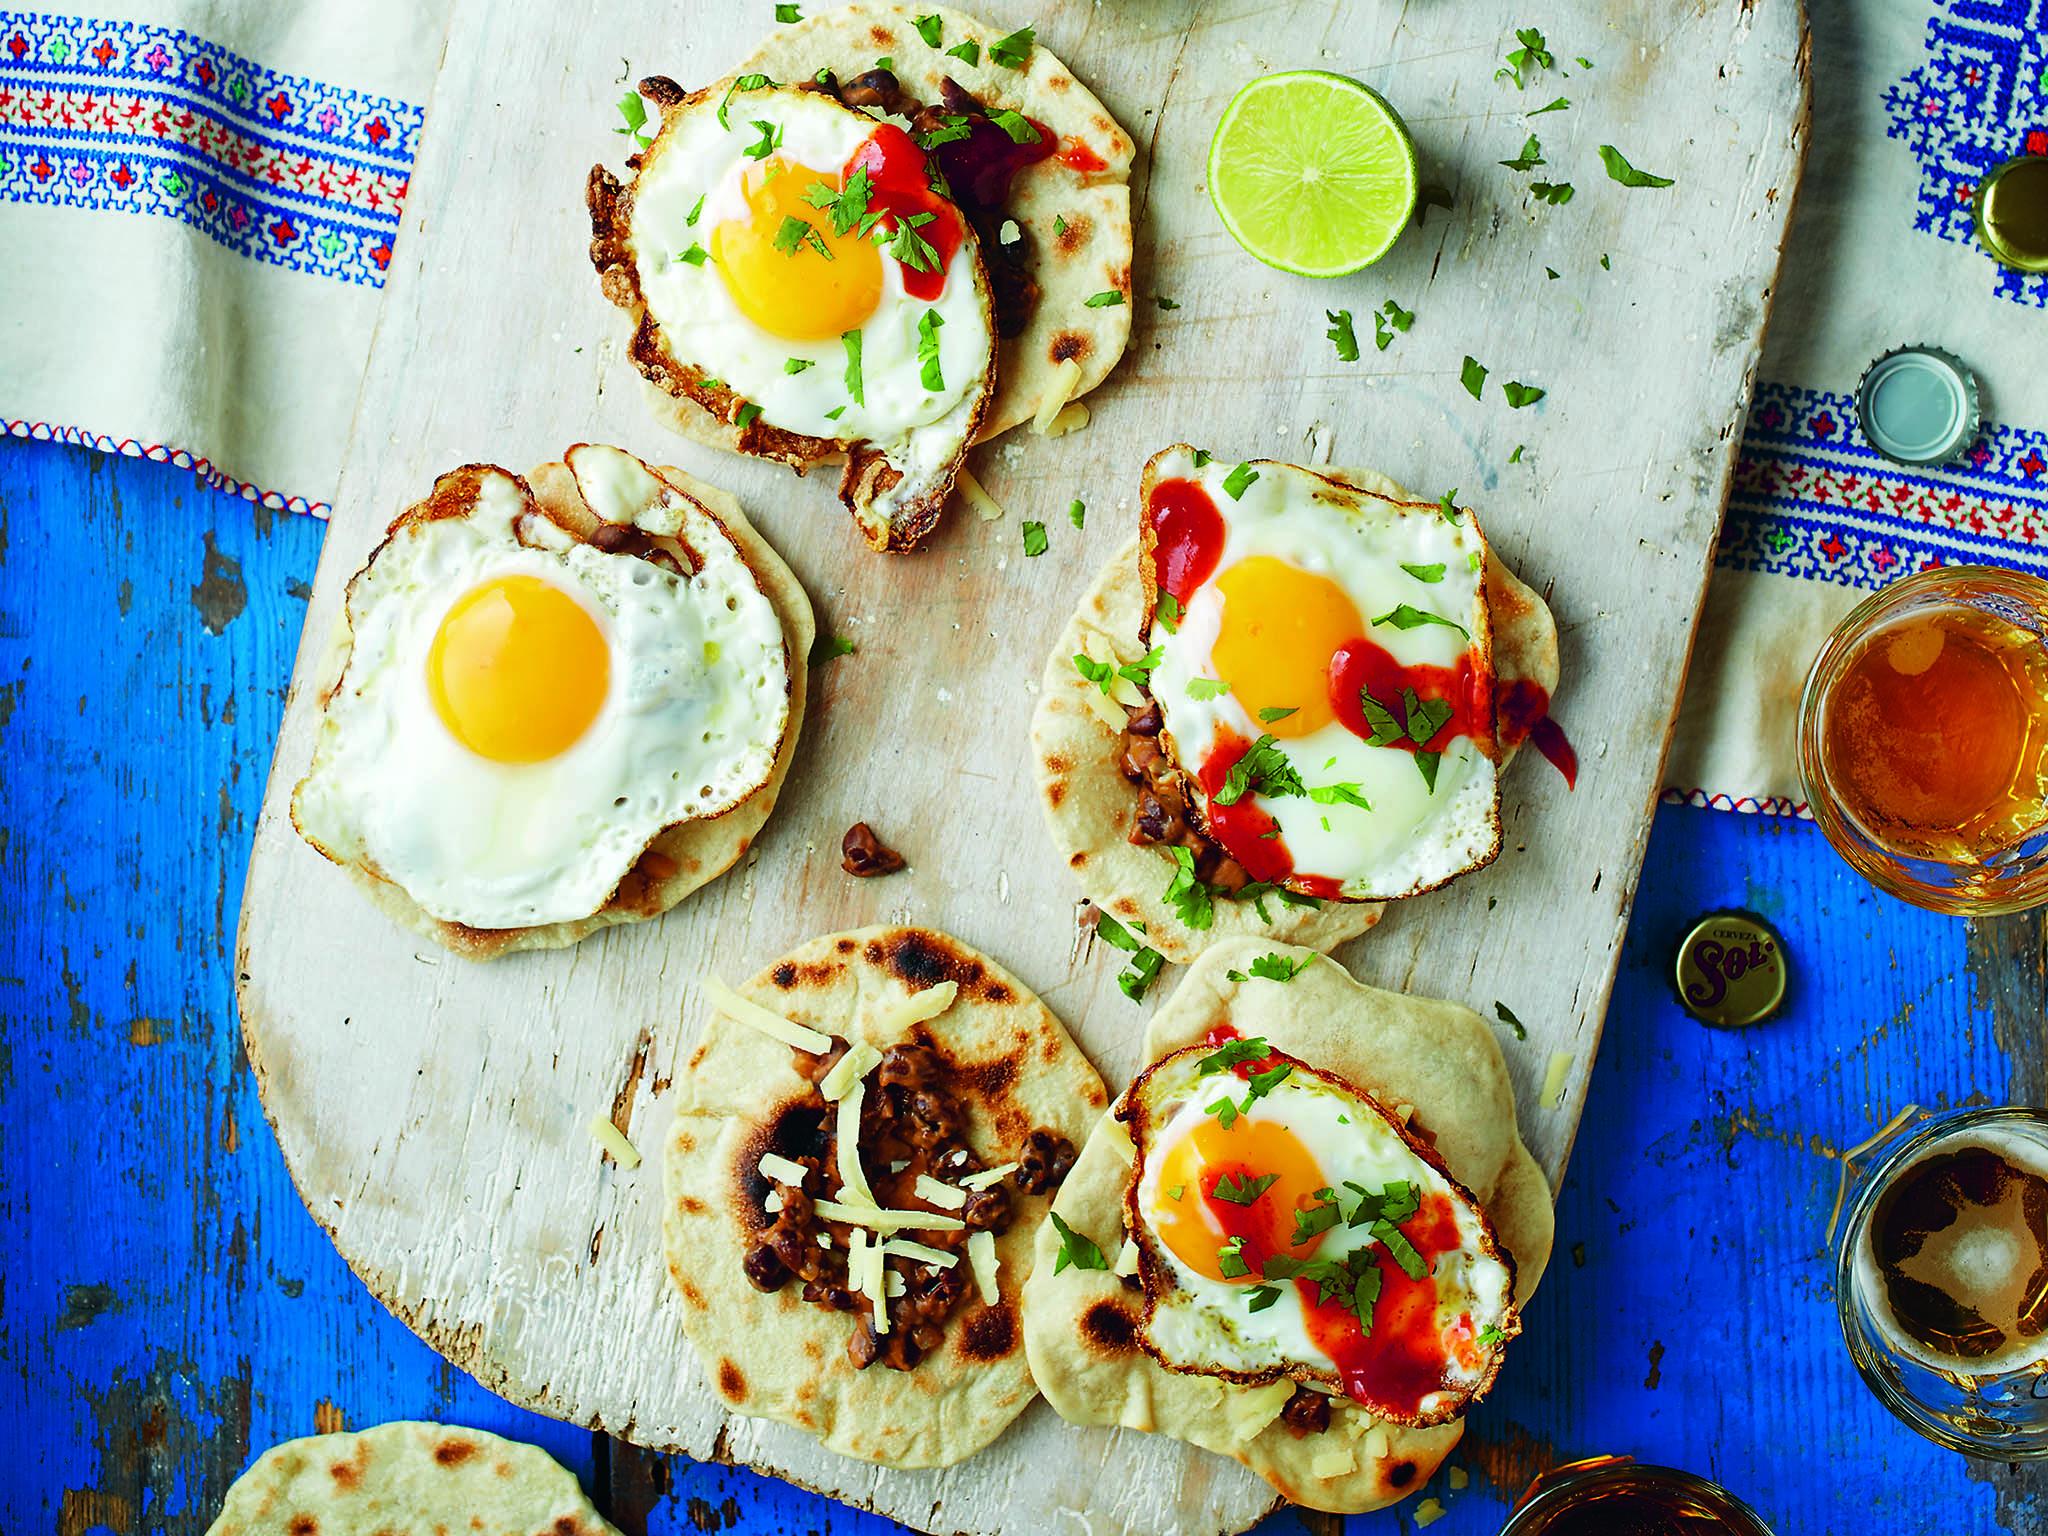 Refried beans with chilli tacos topped with fried egg is a great brunch for Mexican lovers